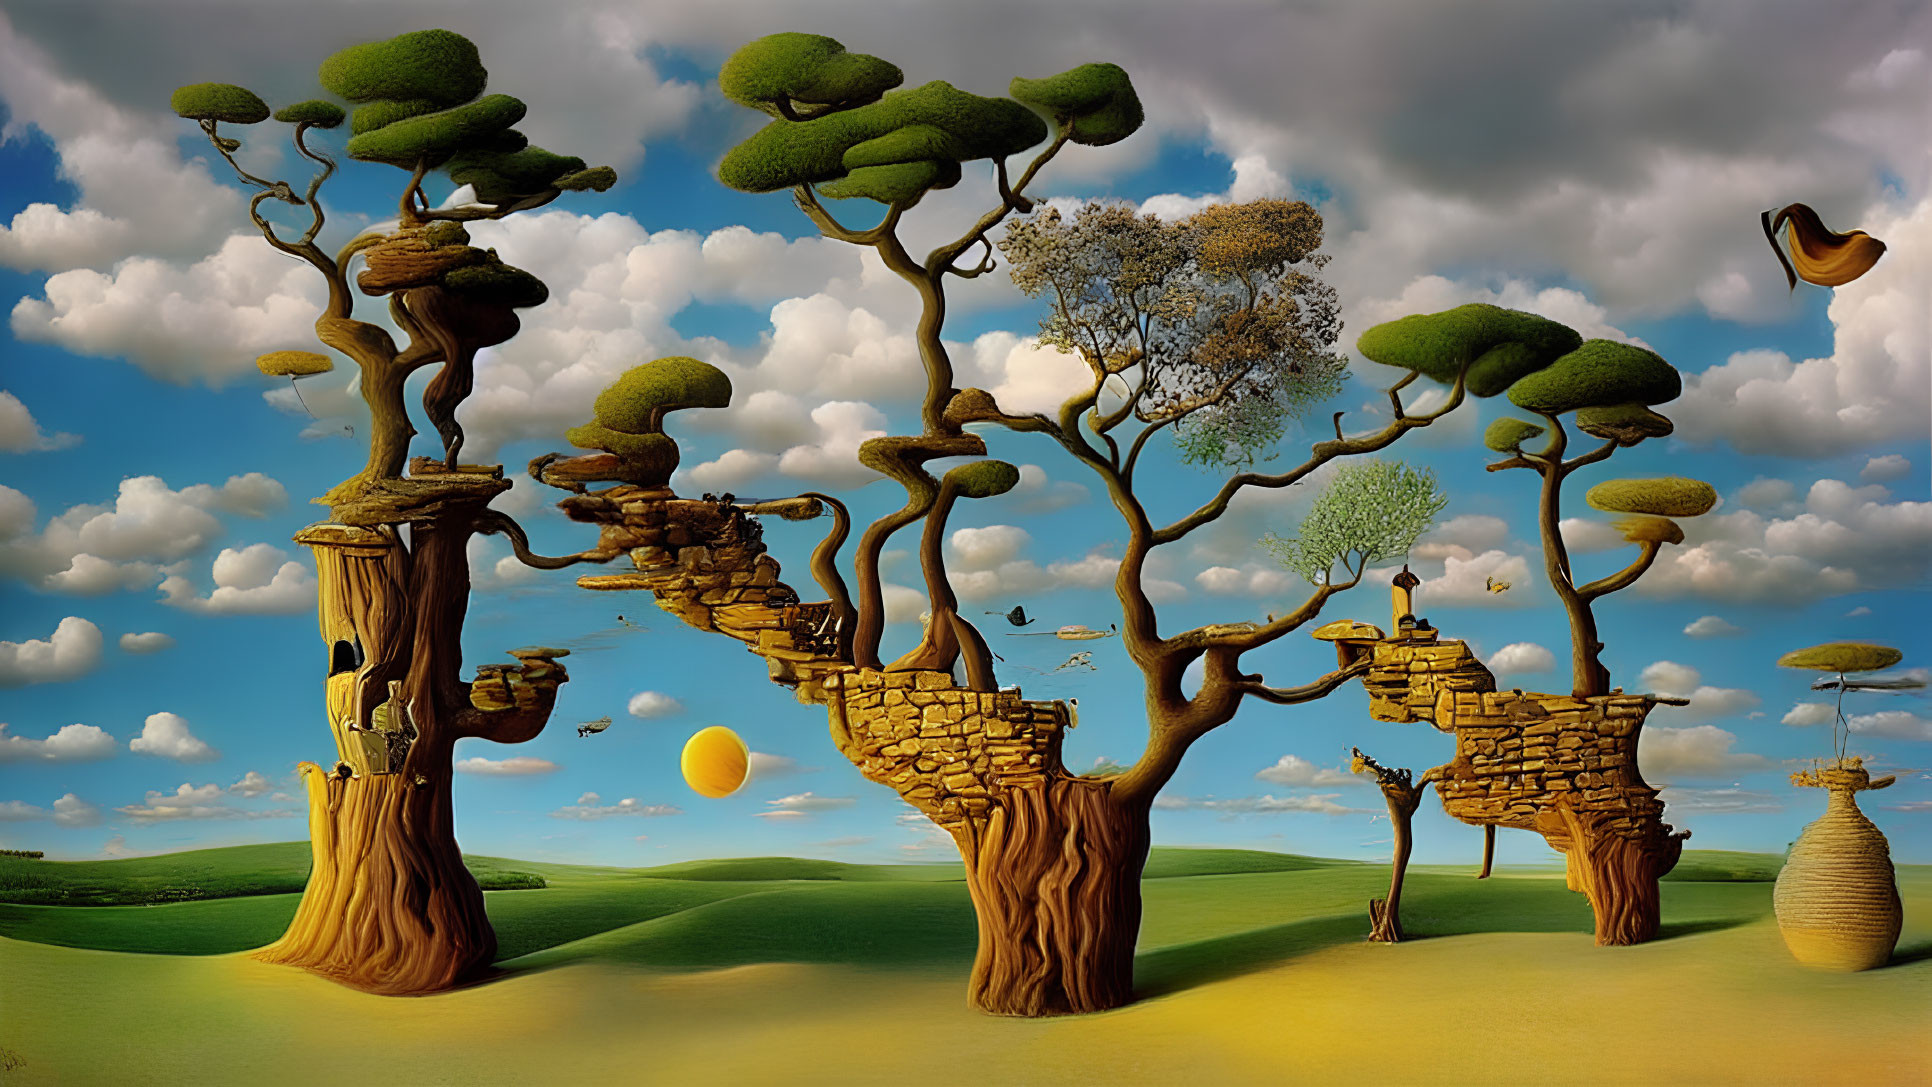 Surreal landscape with whimsical trees, golden boot, and floating yellow ball